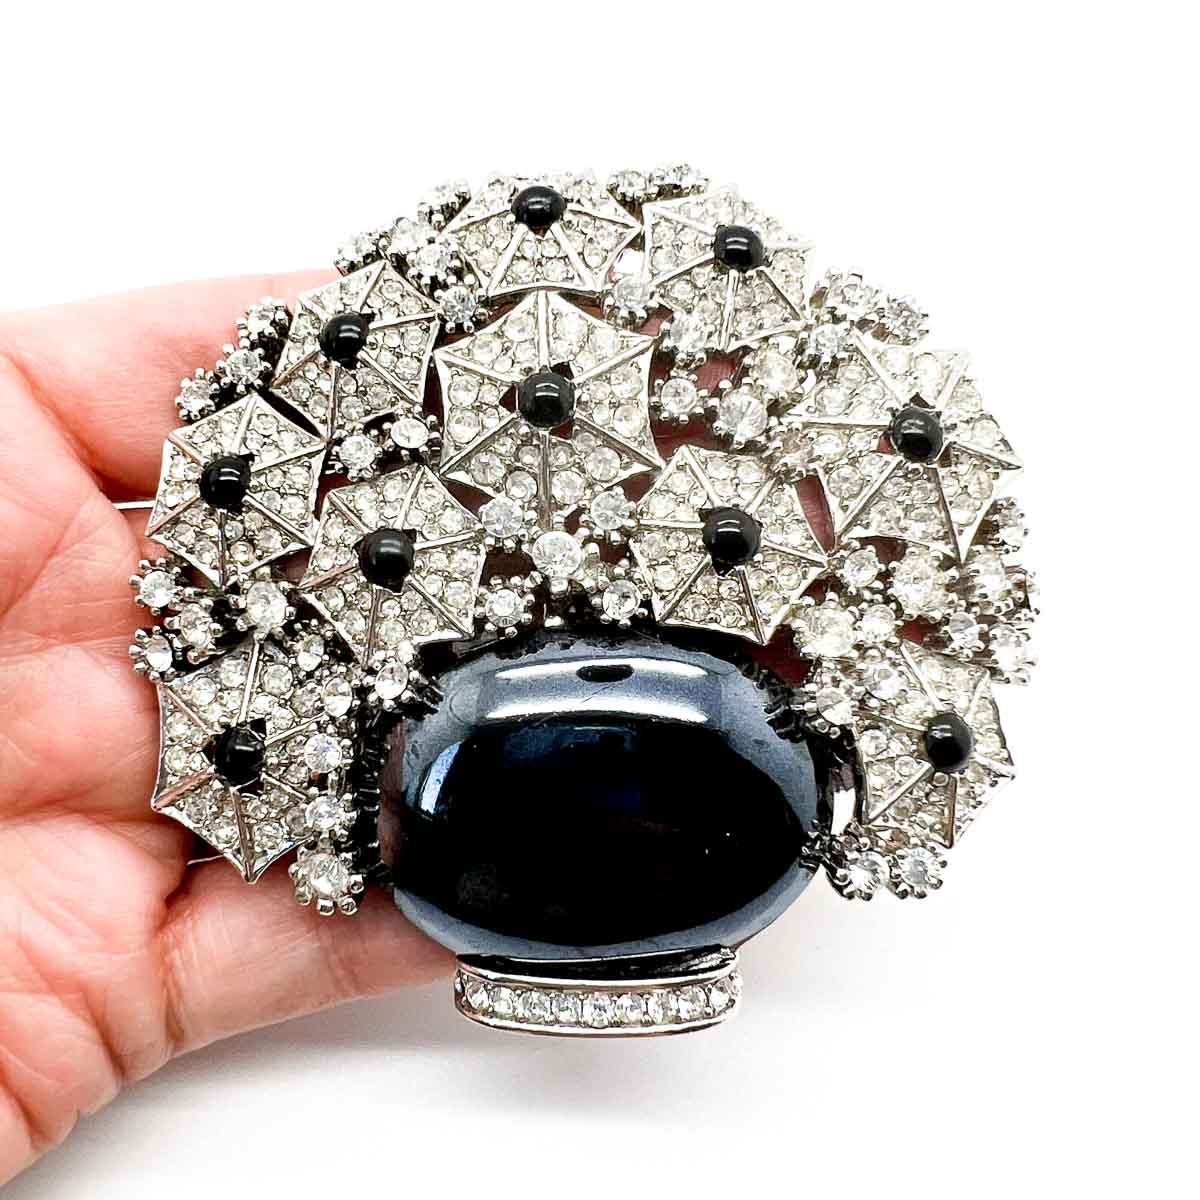 A spectacular Vintage Cristobal Giardinetti Brooch. By London Jeweller Cristobal. Featuring a large pot of stylised flowers in a ultra eye-catching monochrome colour-way. This one is pure lapel joy.

Vintage Condition: Very good without damage or